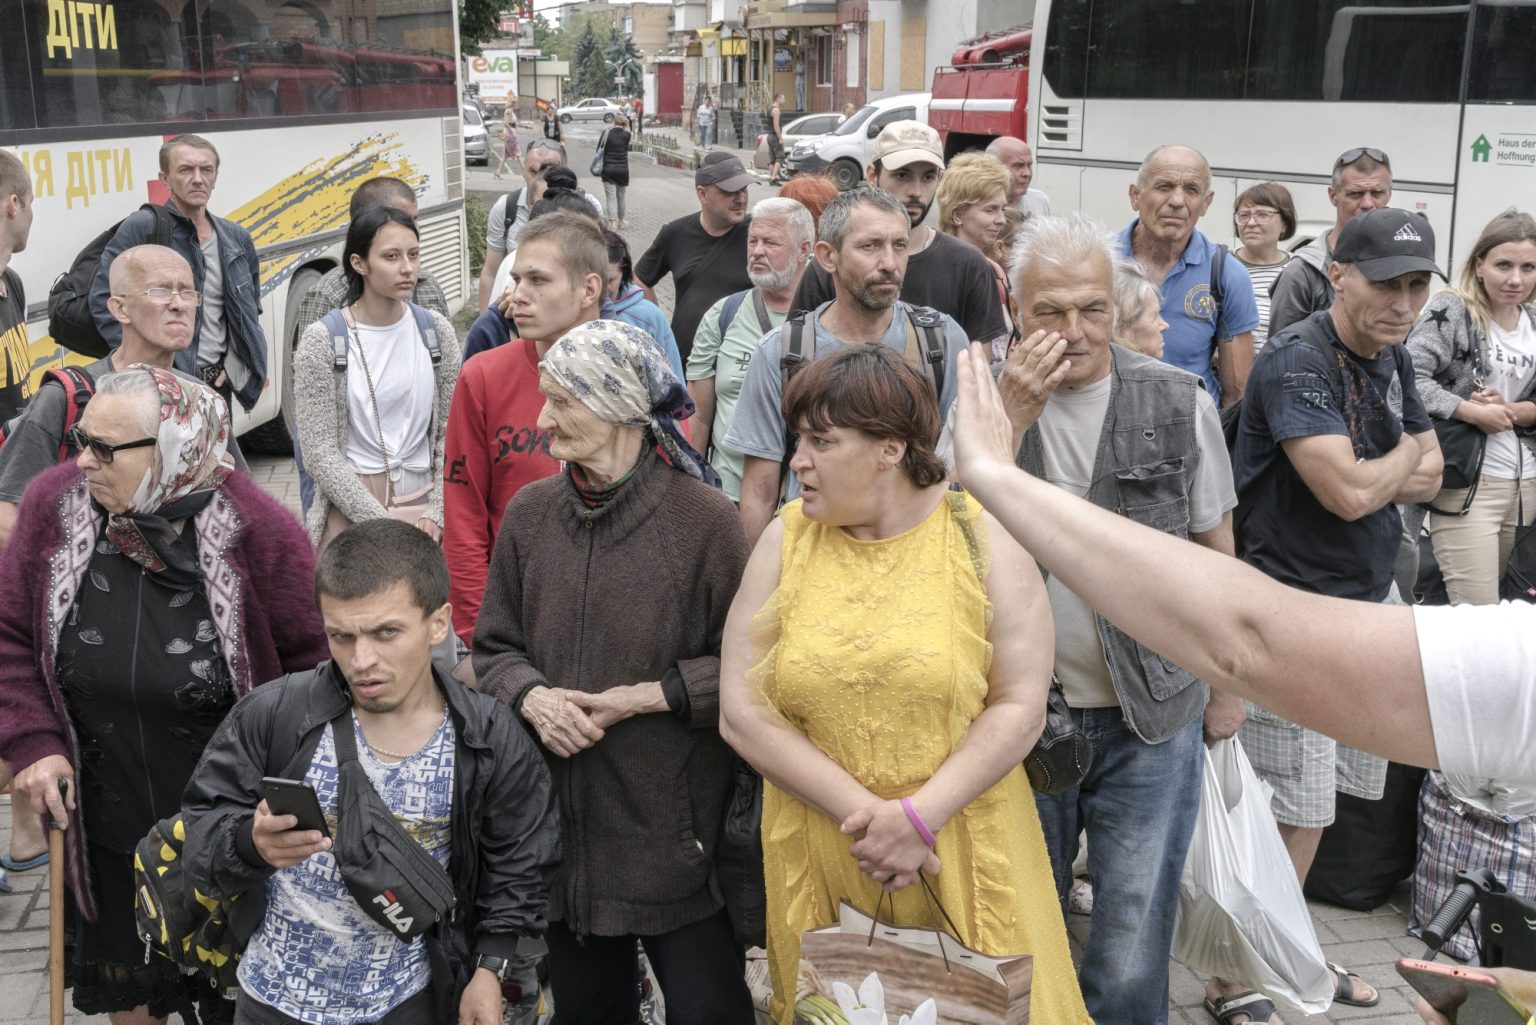 01573072 UKRAINE, Pokrowsk. June 15, 2022 - People evacuated from the area near Severodonetsk wait in front of the Pokrowsk train station to get a train to Dnypro.*** SPECIAL   FEE   APPLIES *** *** Local Caption *** 01573072